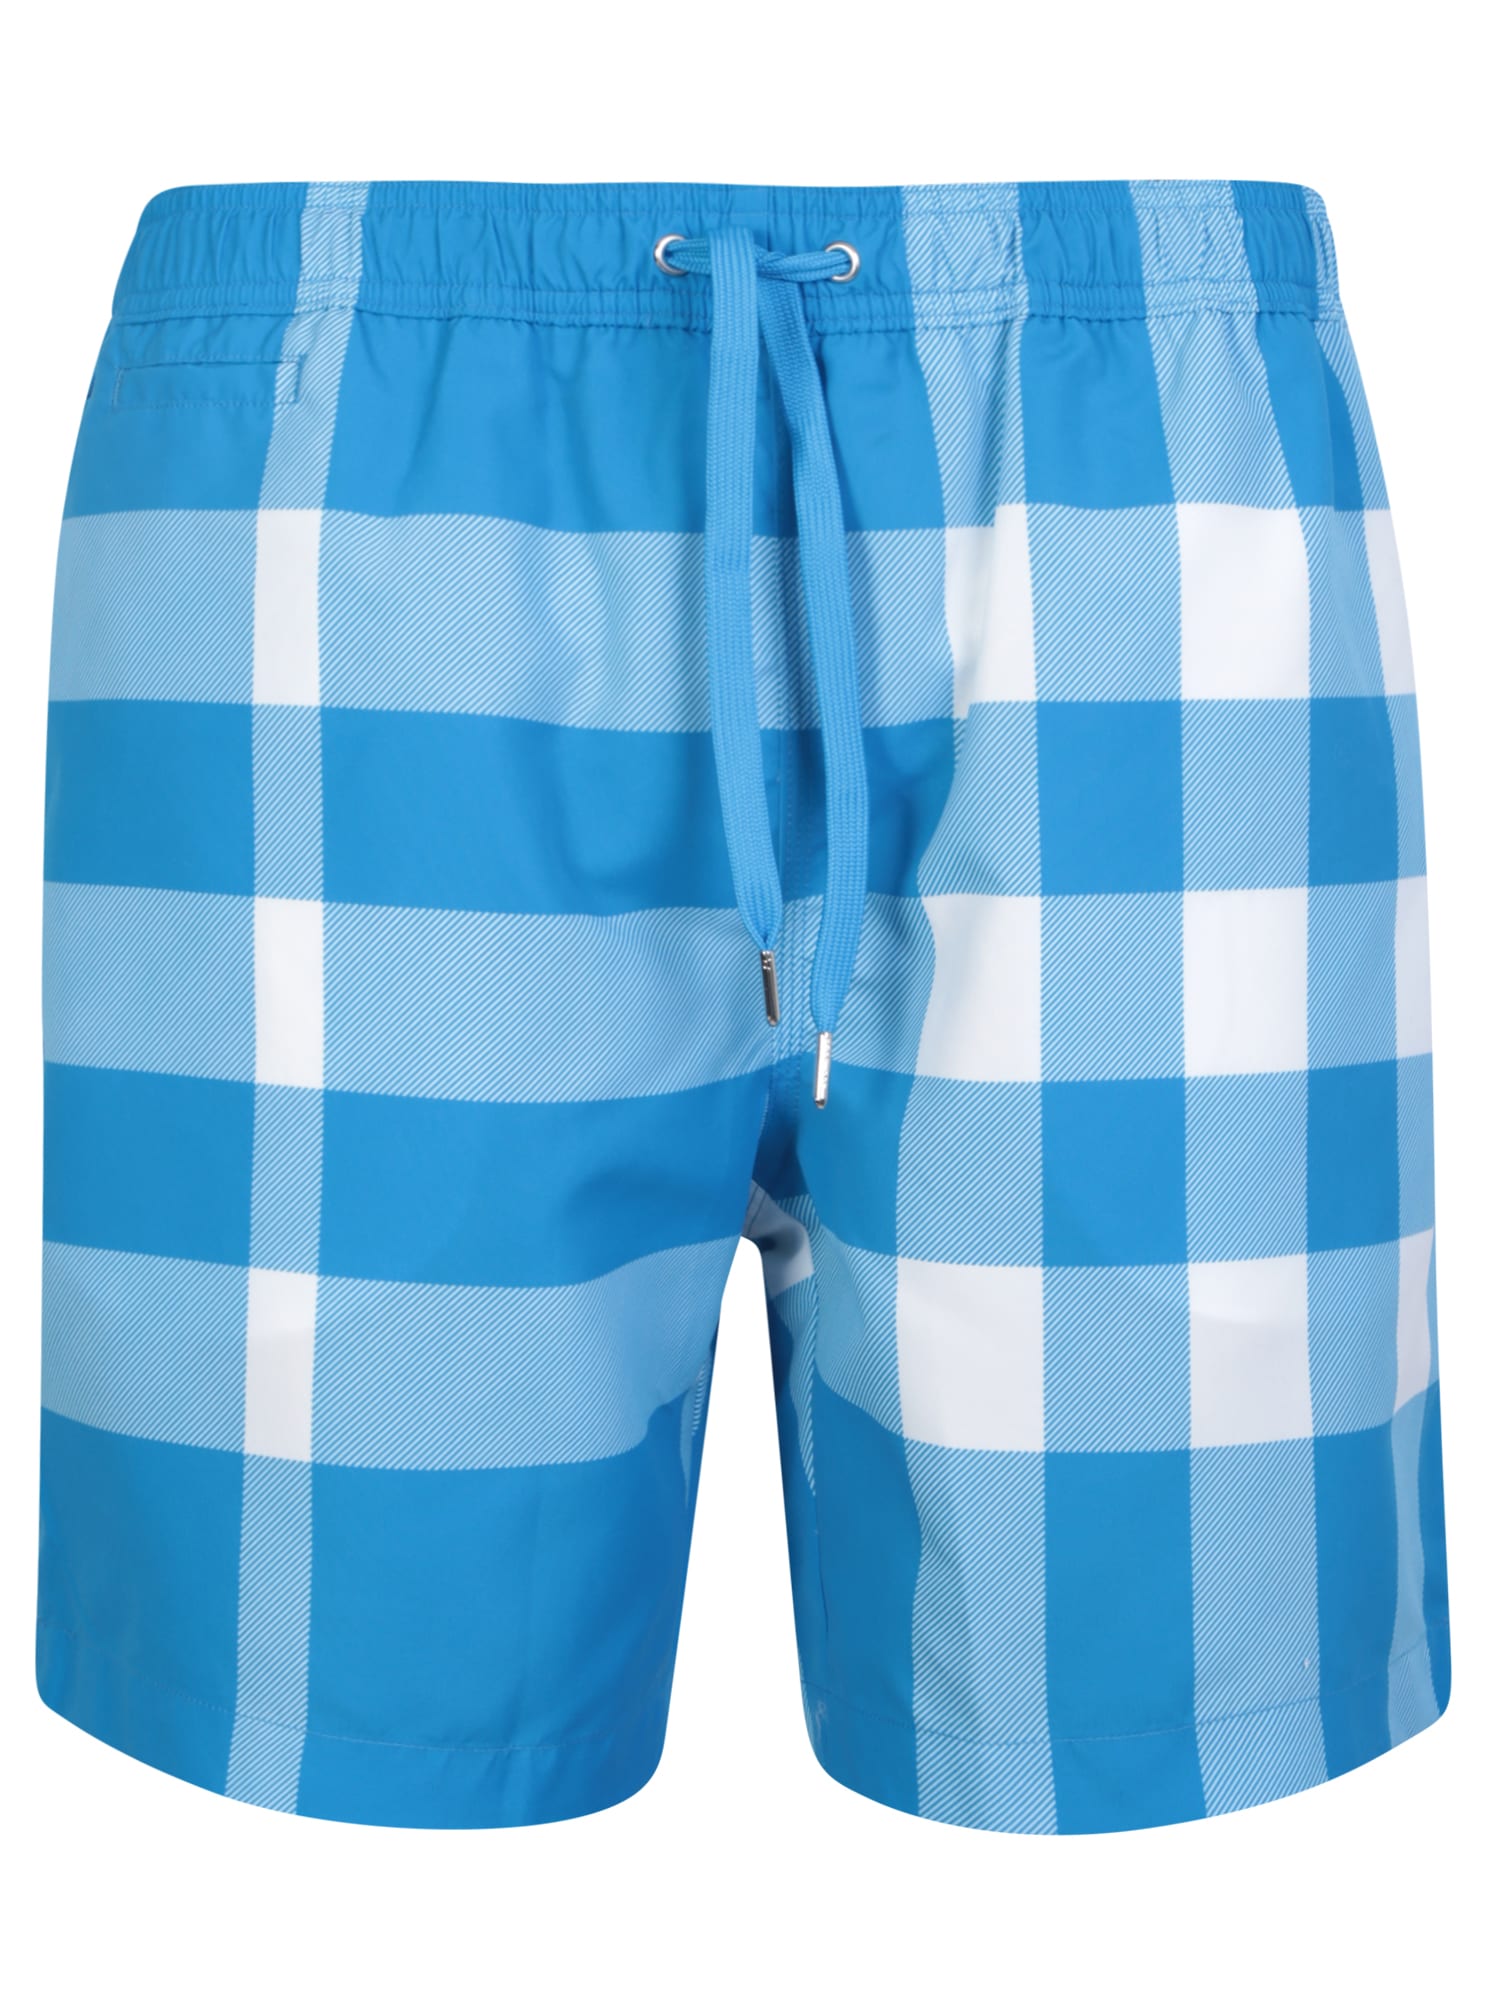 BURBERRY BLUE EXAGGERETED CHECK PATTERN SWIM SHORTS